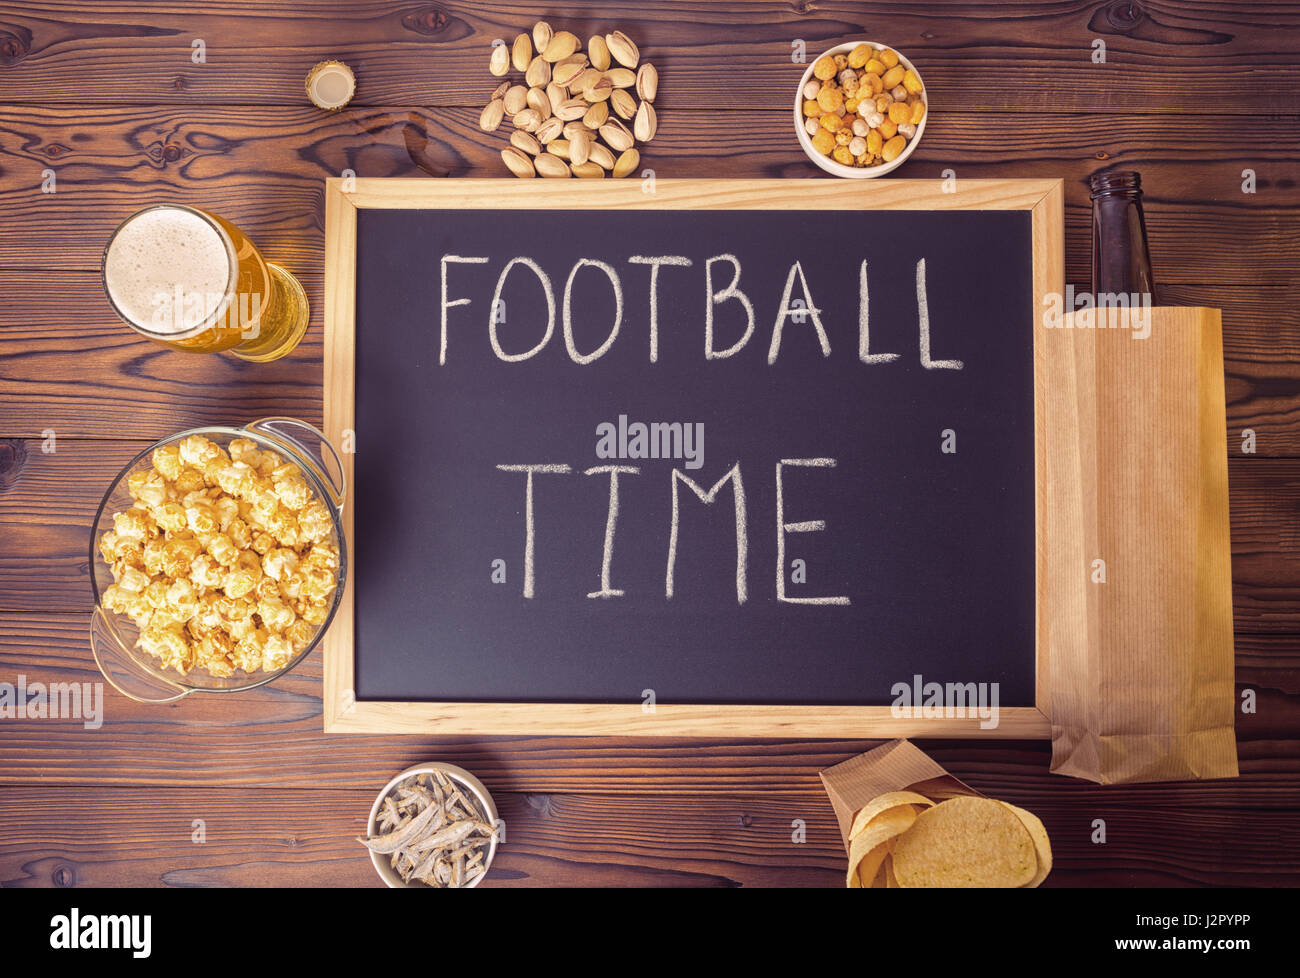 football fans setting of beer bottle in brown paper bag,  glass, chips, pistachio and handwriting text football time written in chalkboard over wooden Stock Photo